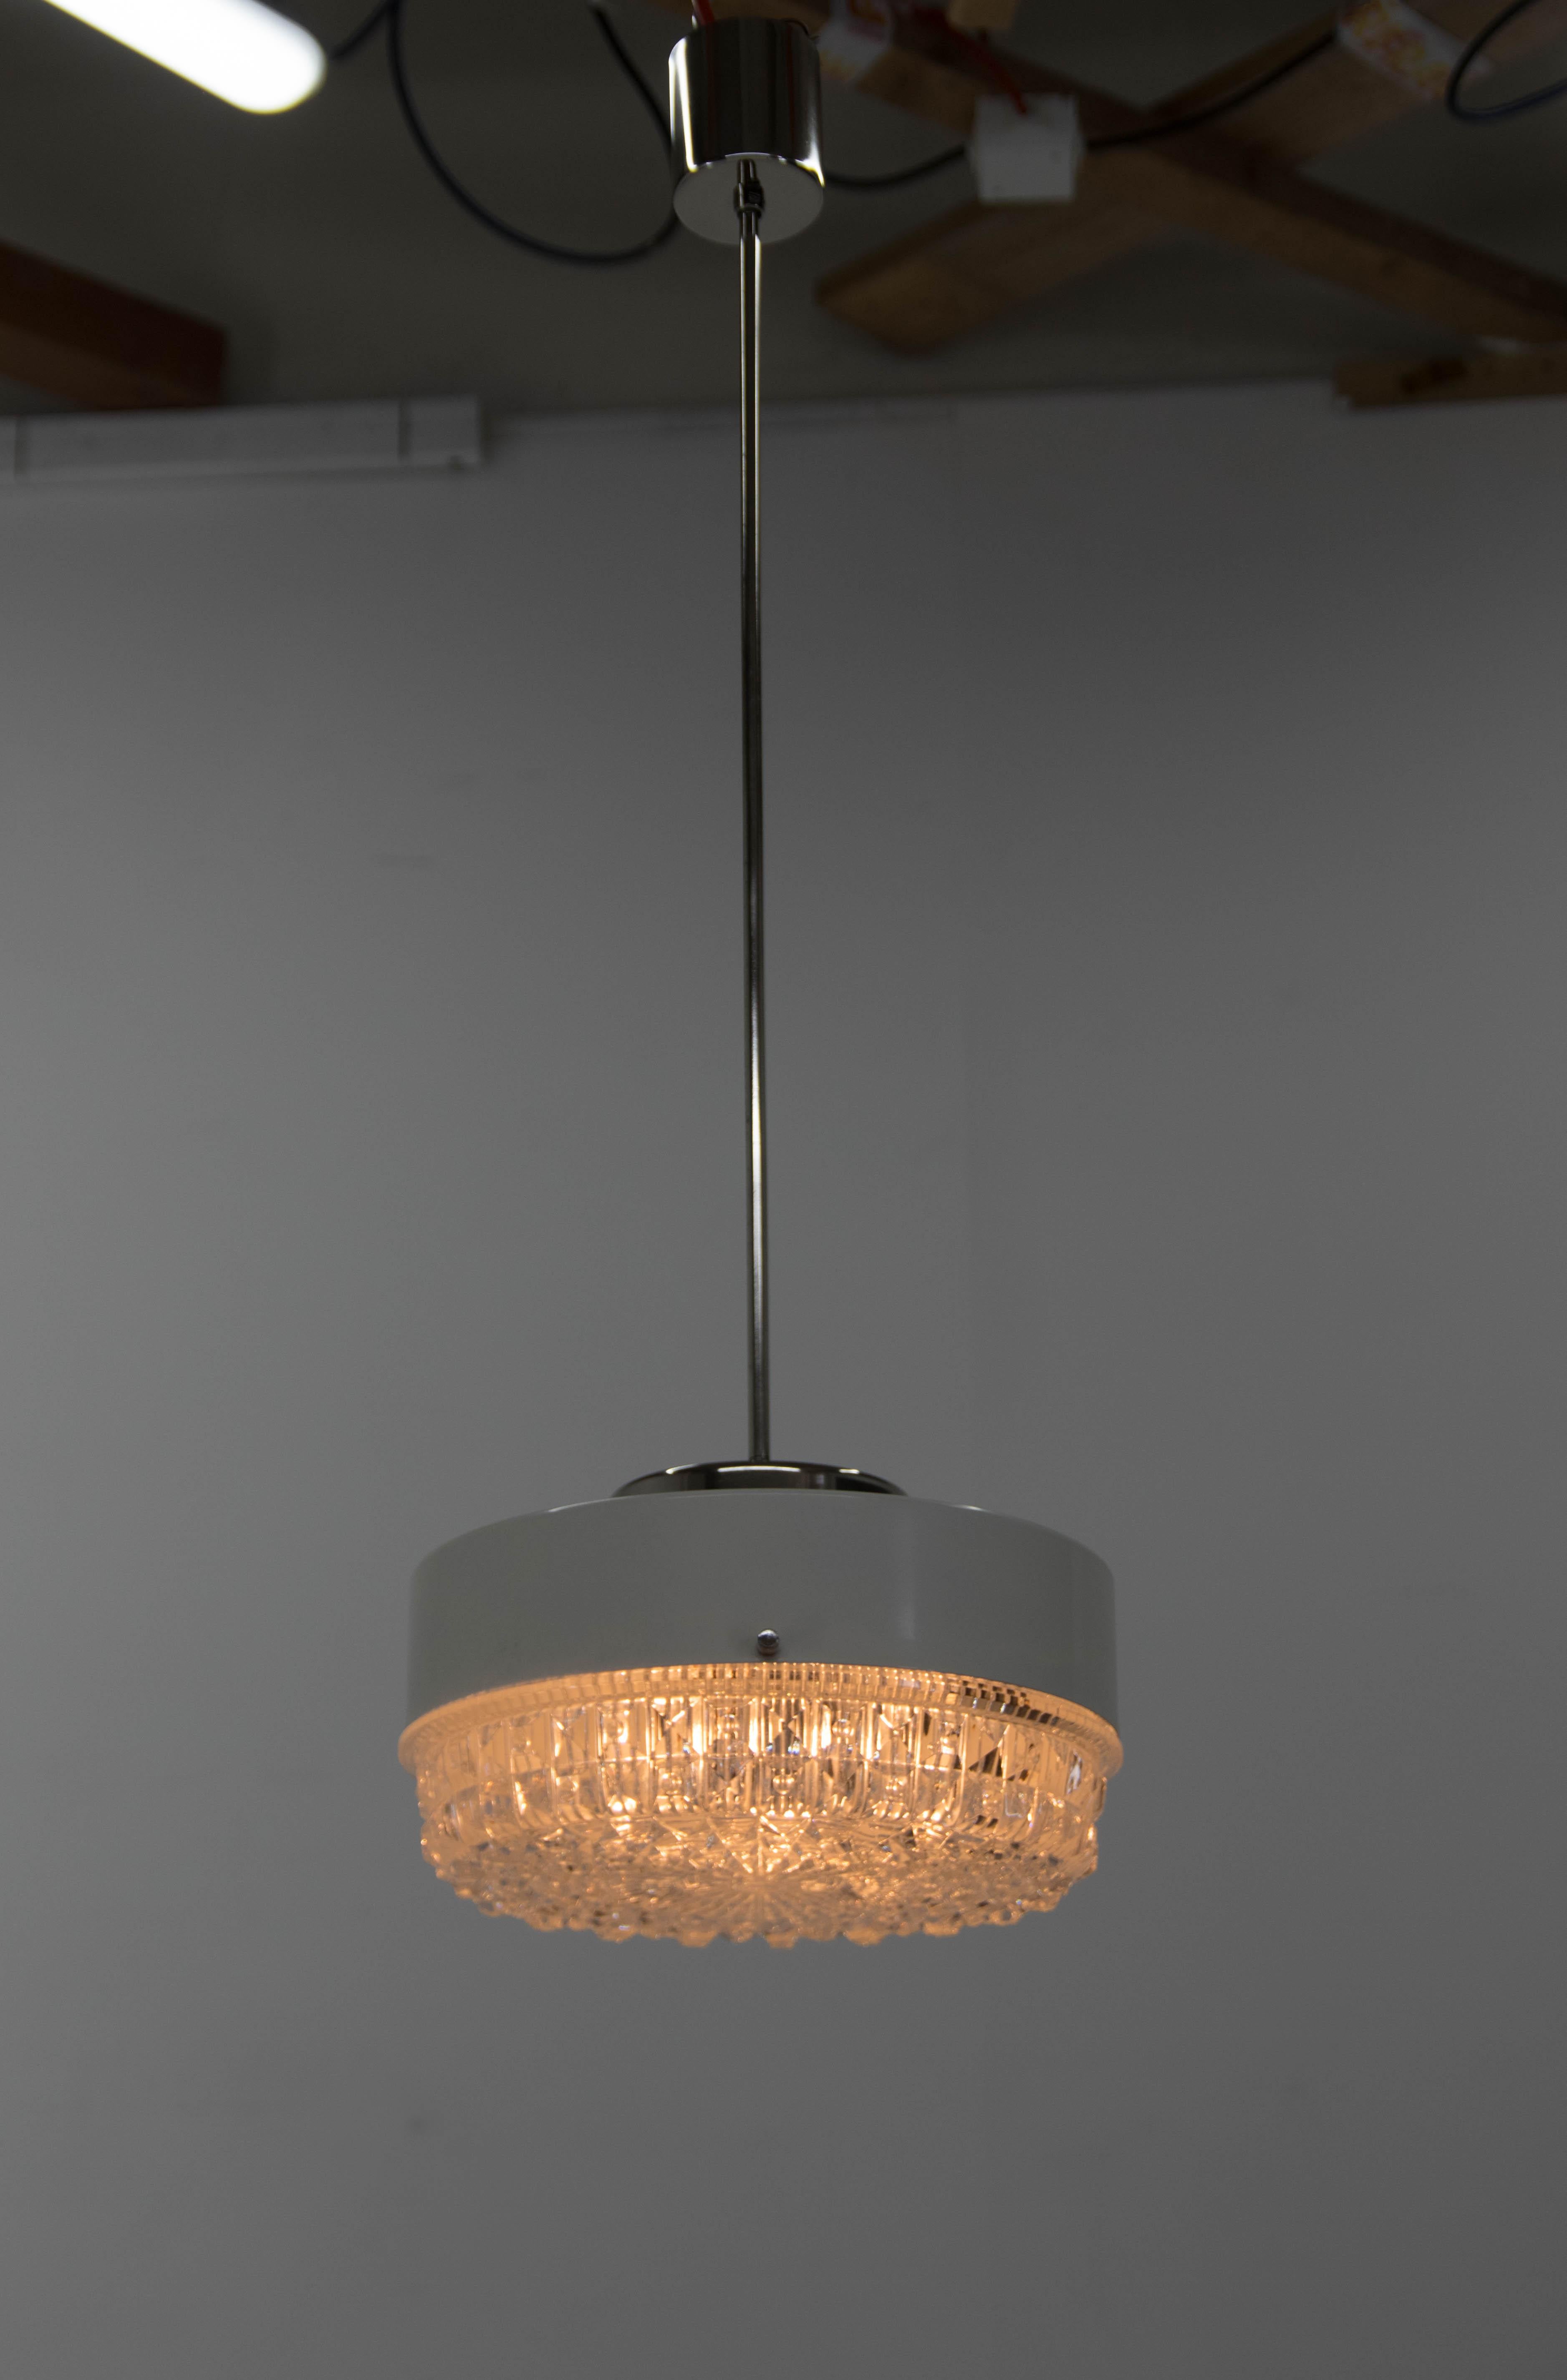 midcentury glass and white metal pendant.
Made in Czechoslovakia in 1960s.
Restored: new white paint.
Rewired: 1x60W, E25-E27 bulb
US wiring compatible.